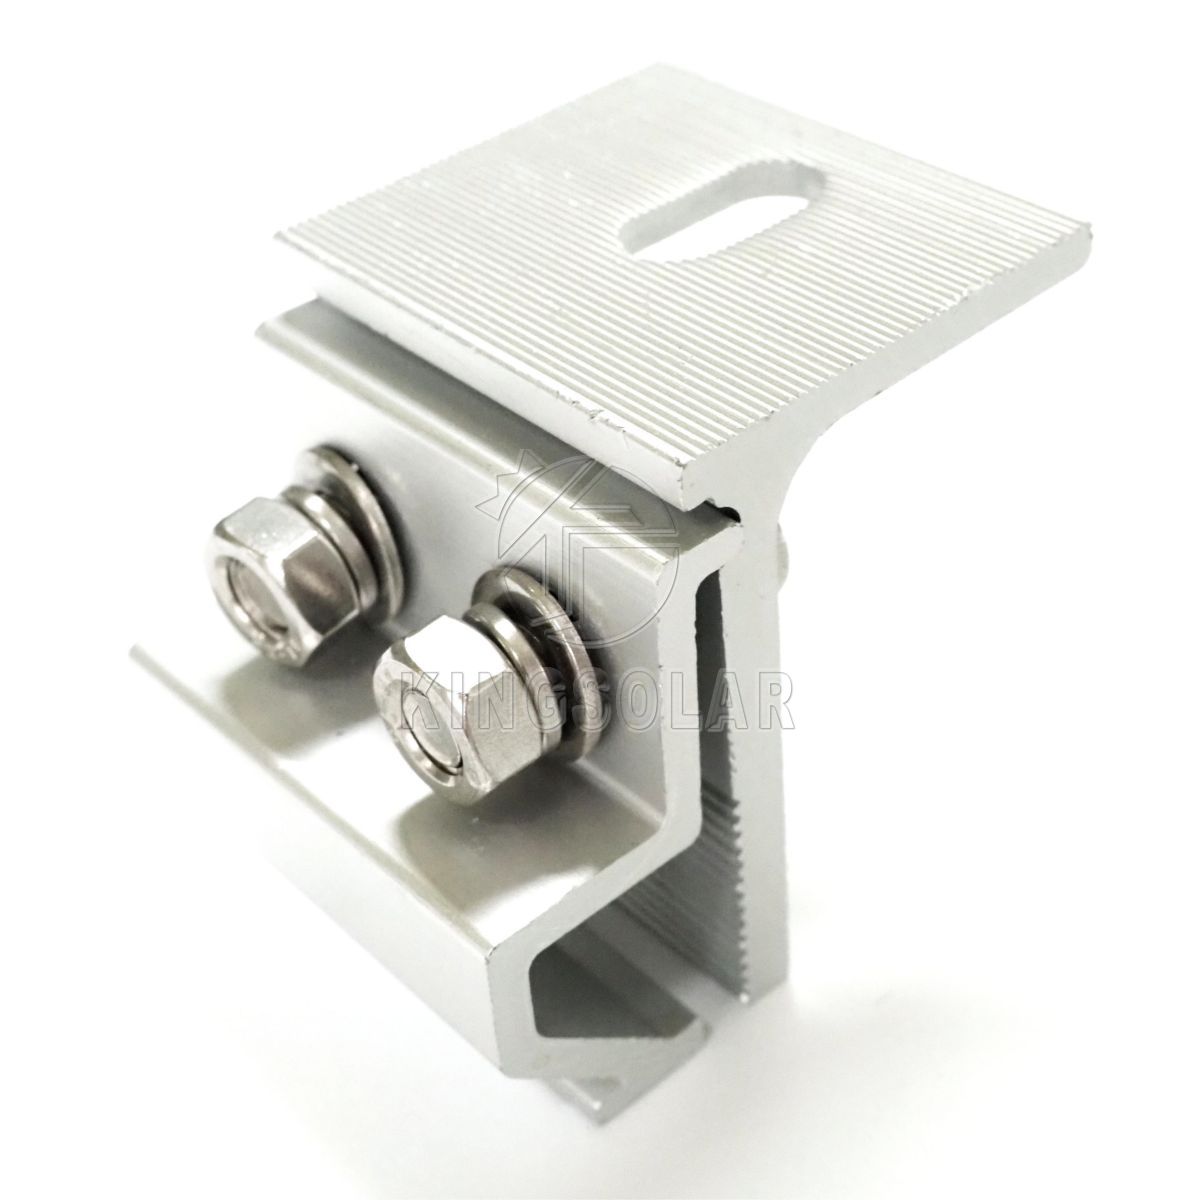 Mountings Fitting Aluminium Accessories Roof Clamp